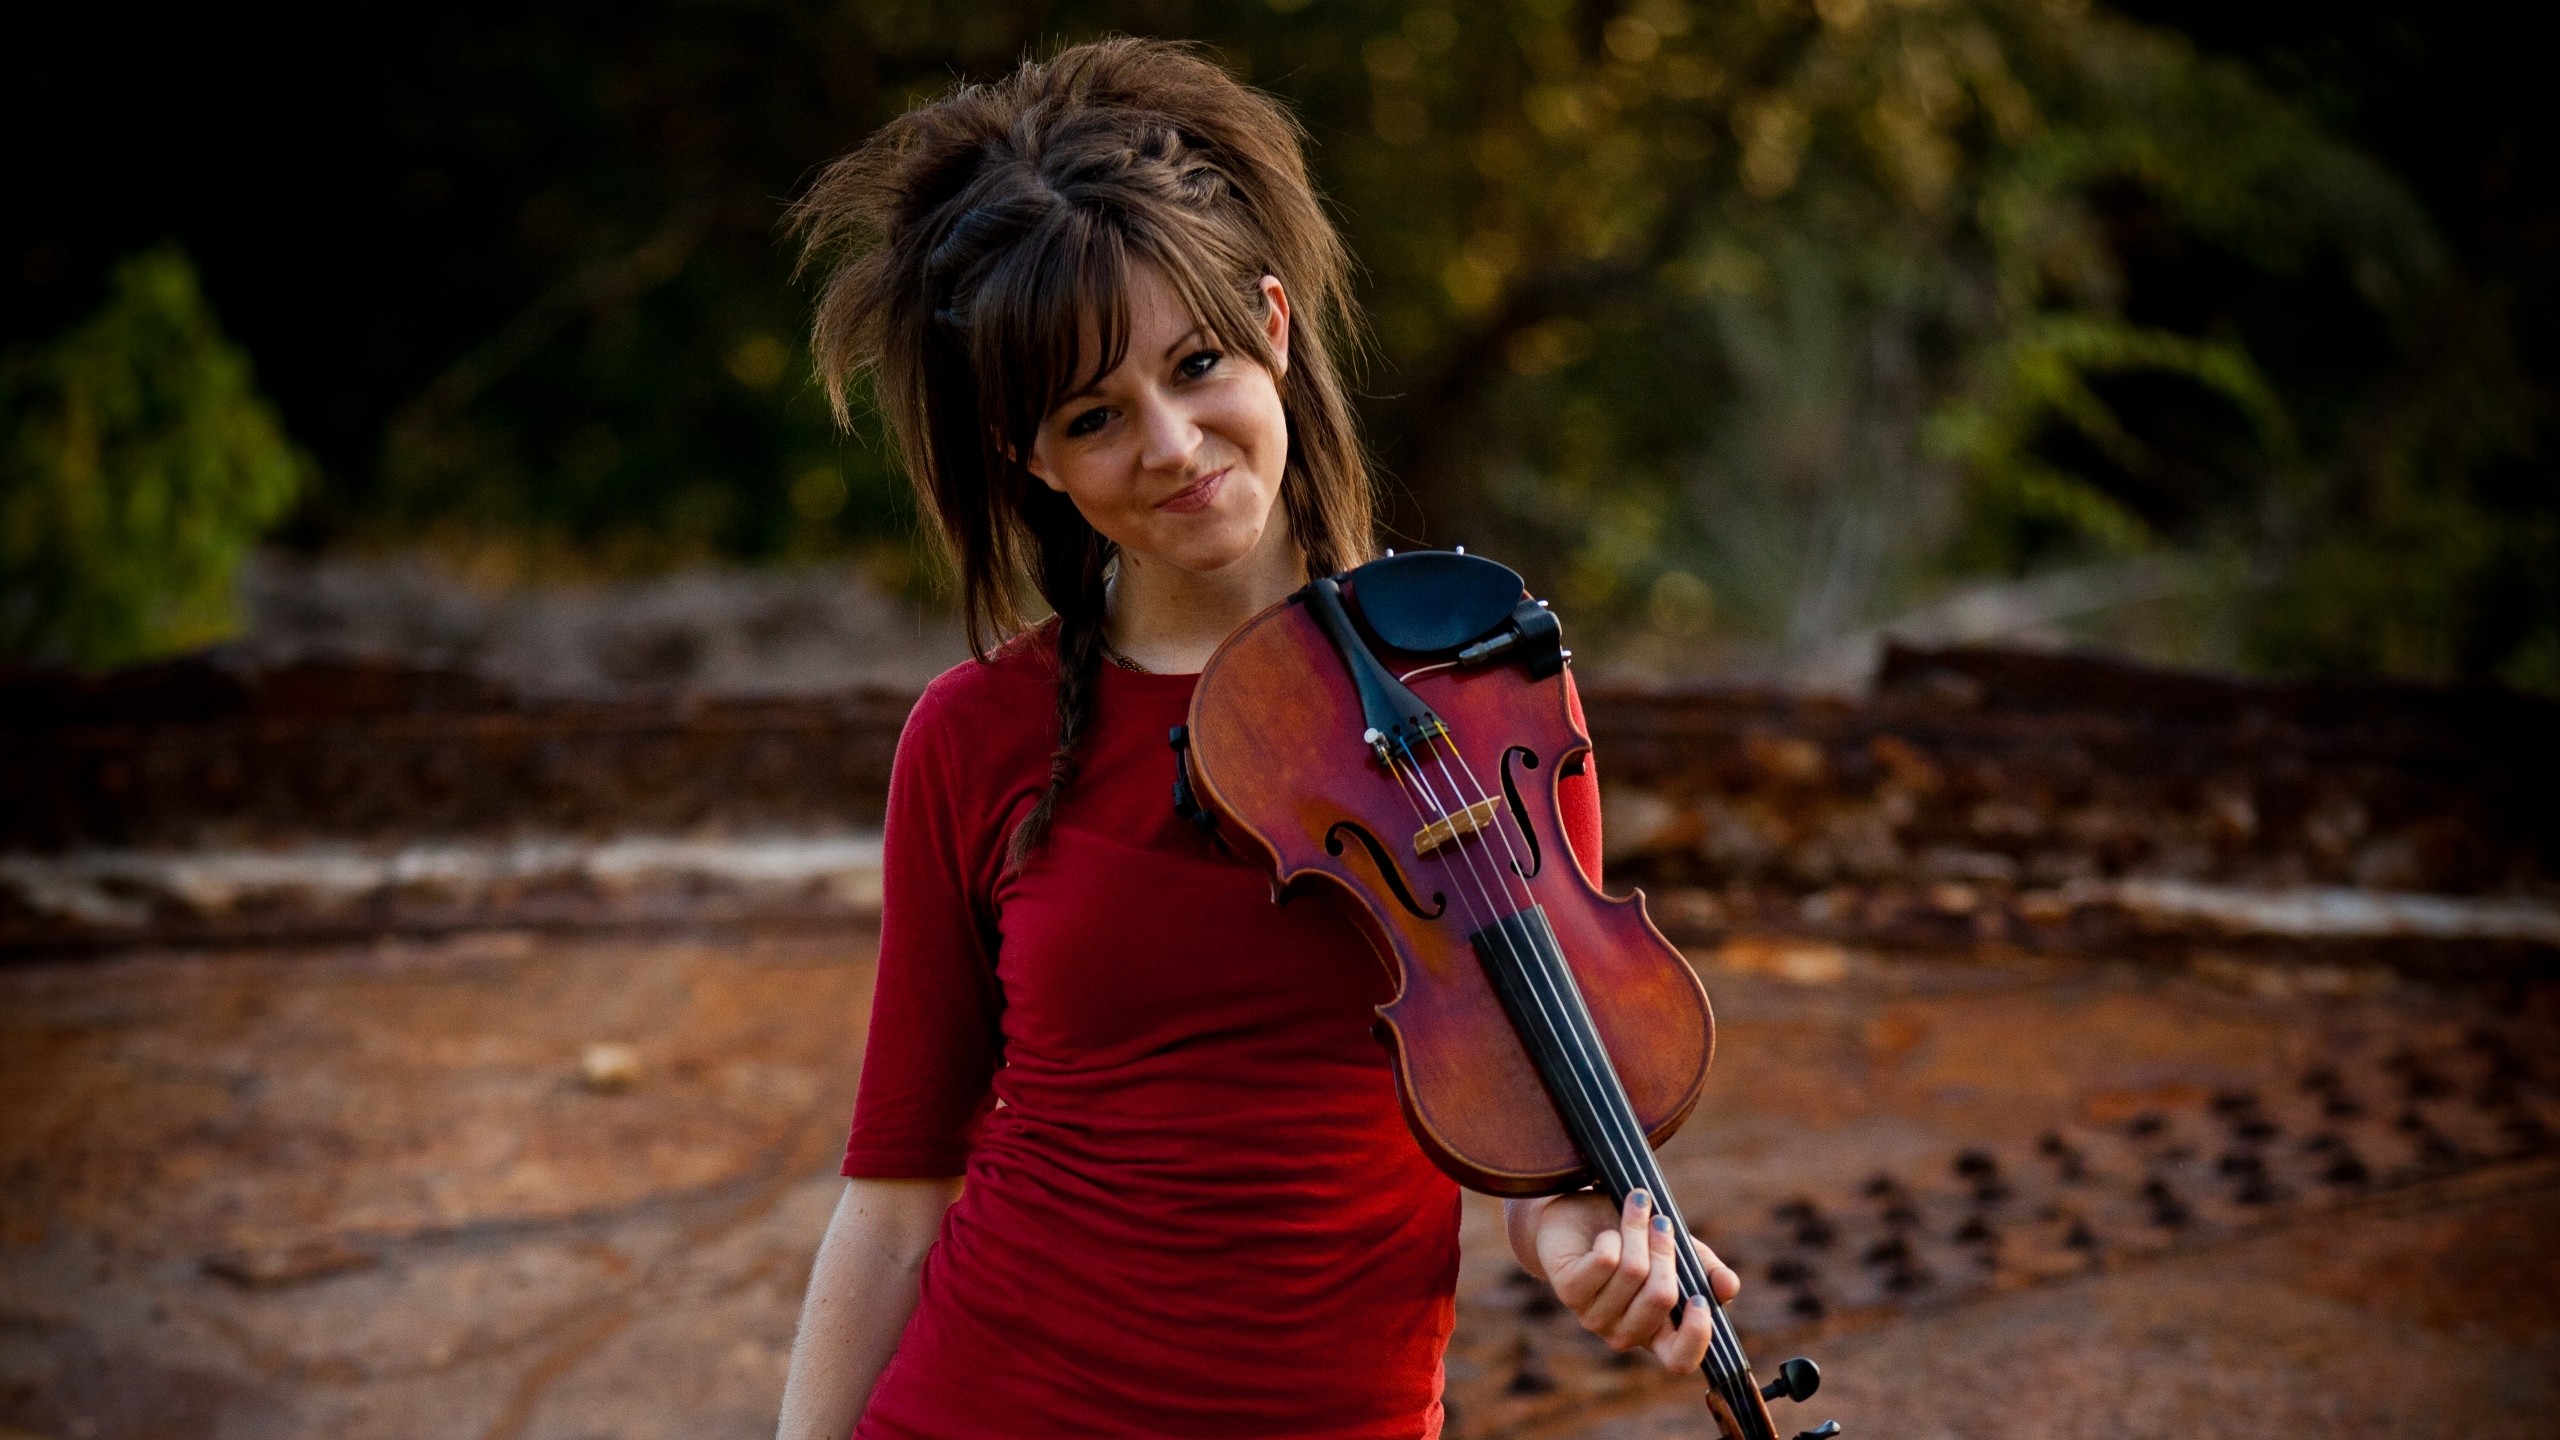 People 2560x1440 Lindsey Stirling red clothing violin women musician musical instrument looking at viewer celebrity women outdoors